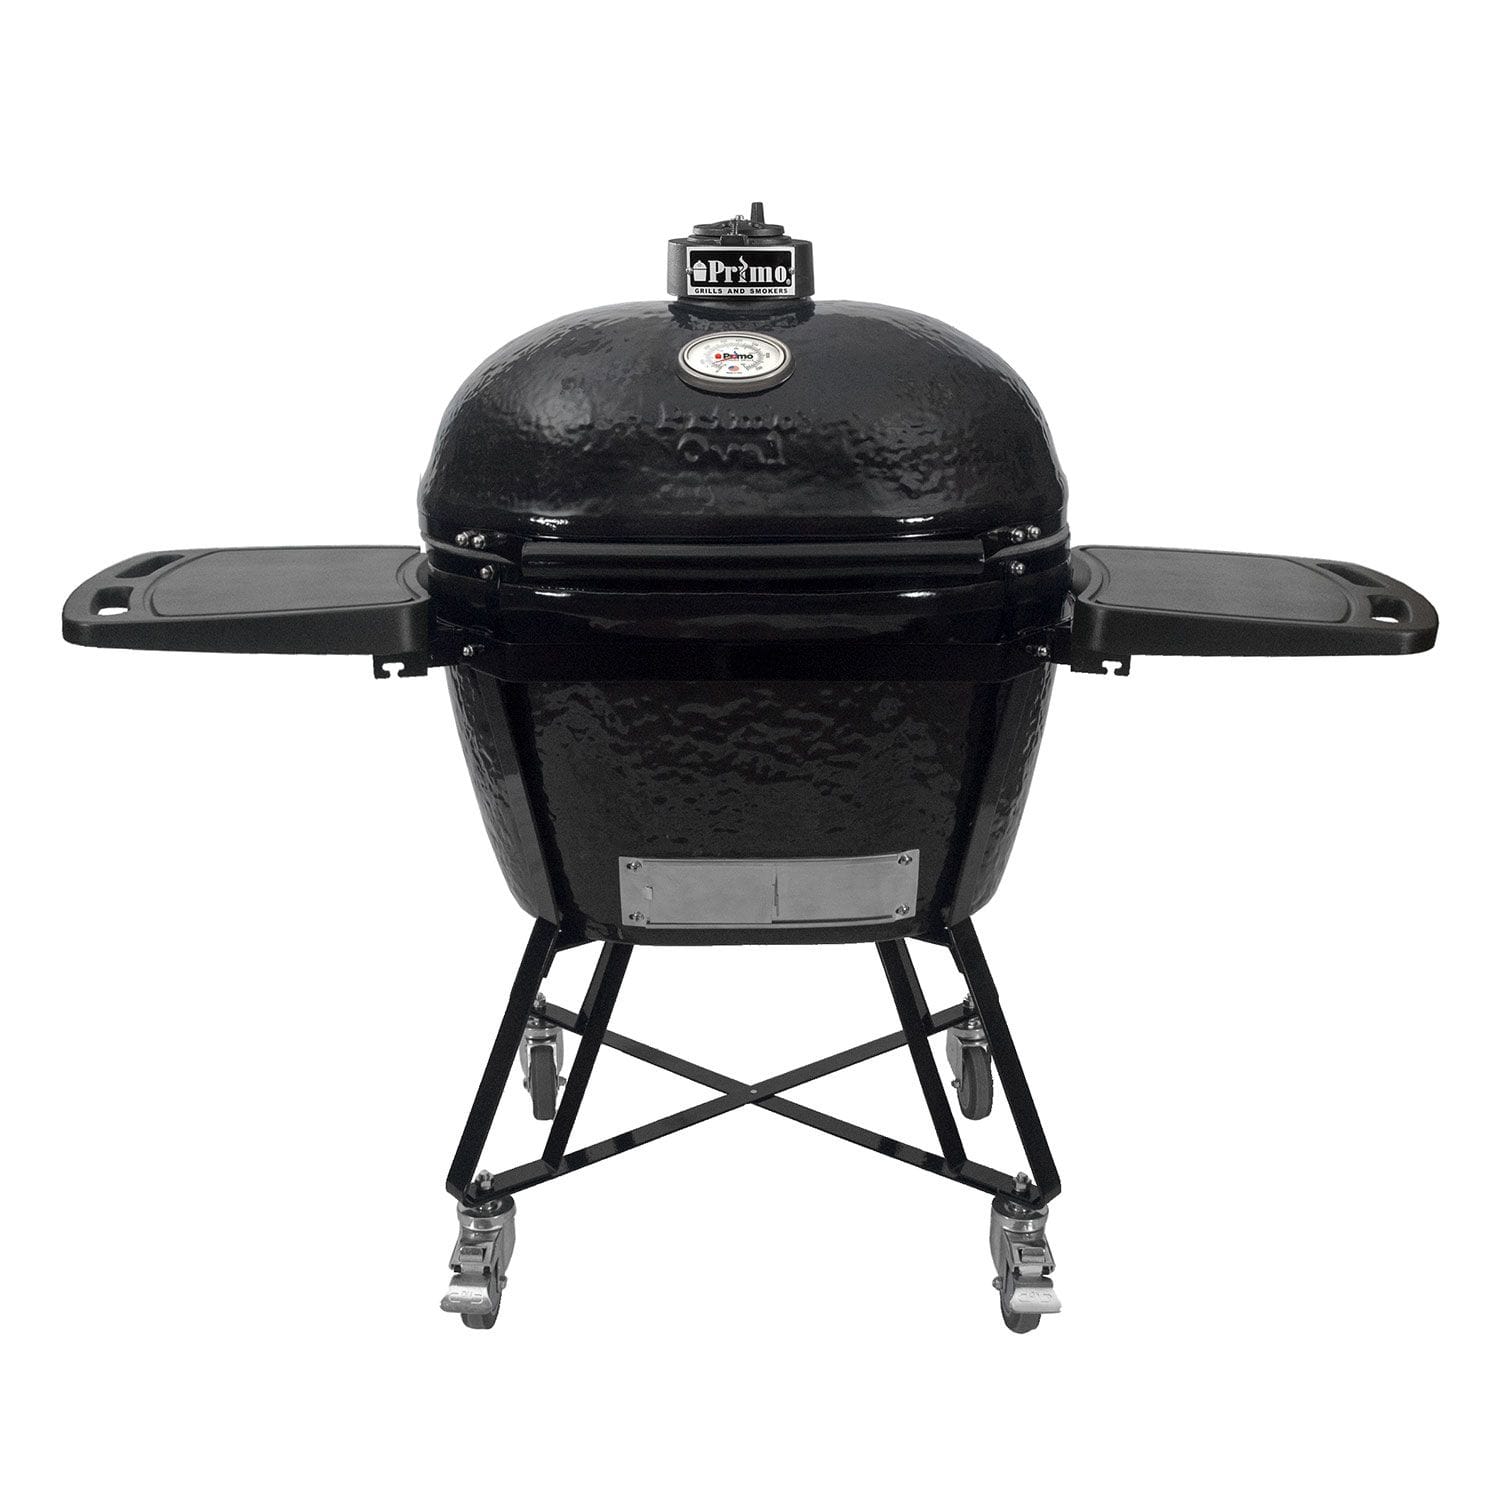 Primo Grills Primo All-In-One Ceramic Oval X-Large Charcoal Grill / PGCXLC